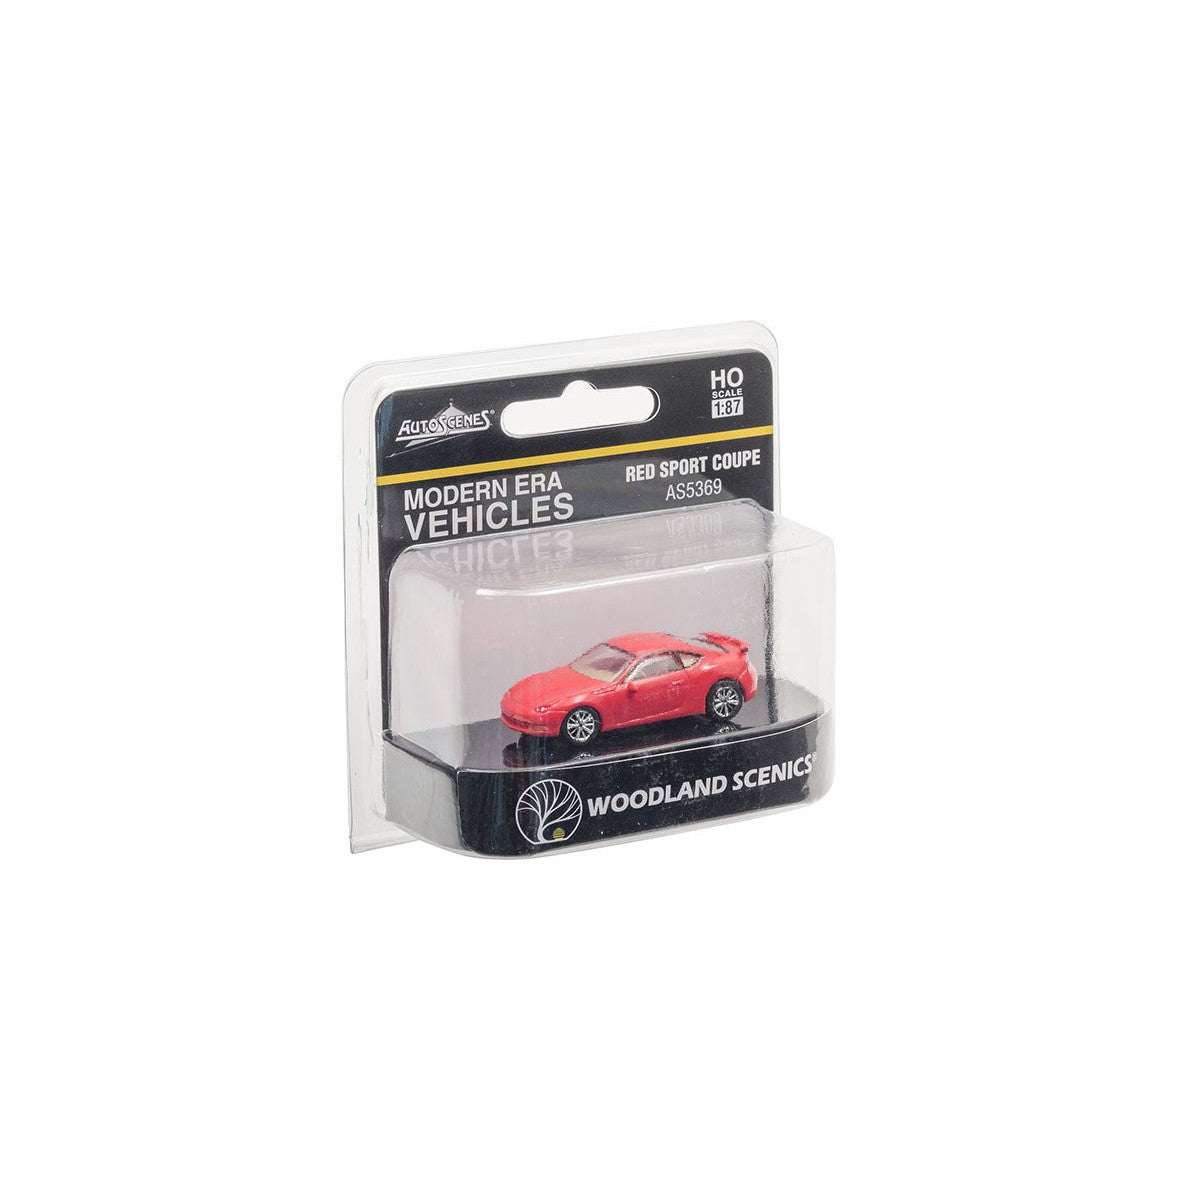 Woodland Scenics HO Scale Red Sport Coupe Modern Era Vehicles